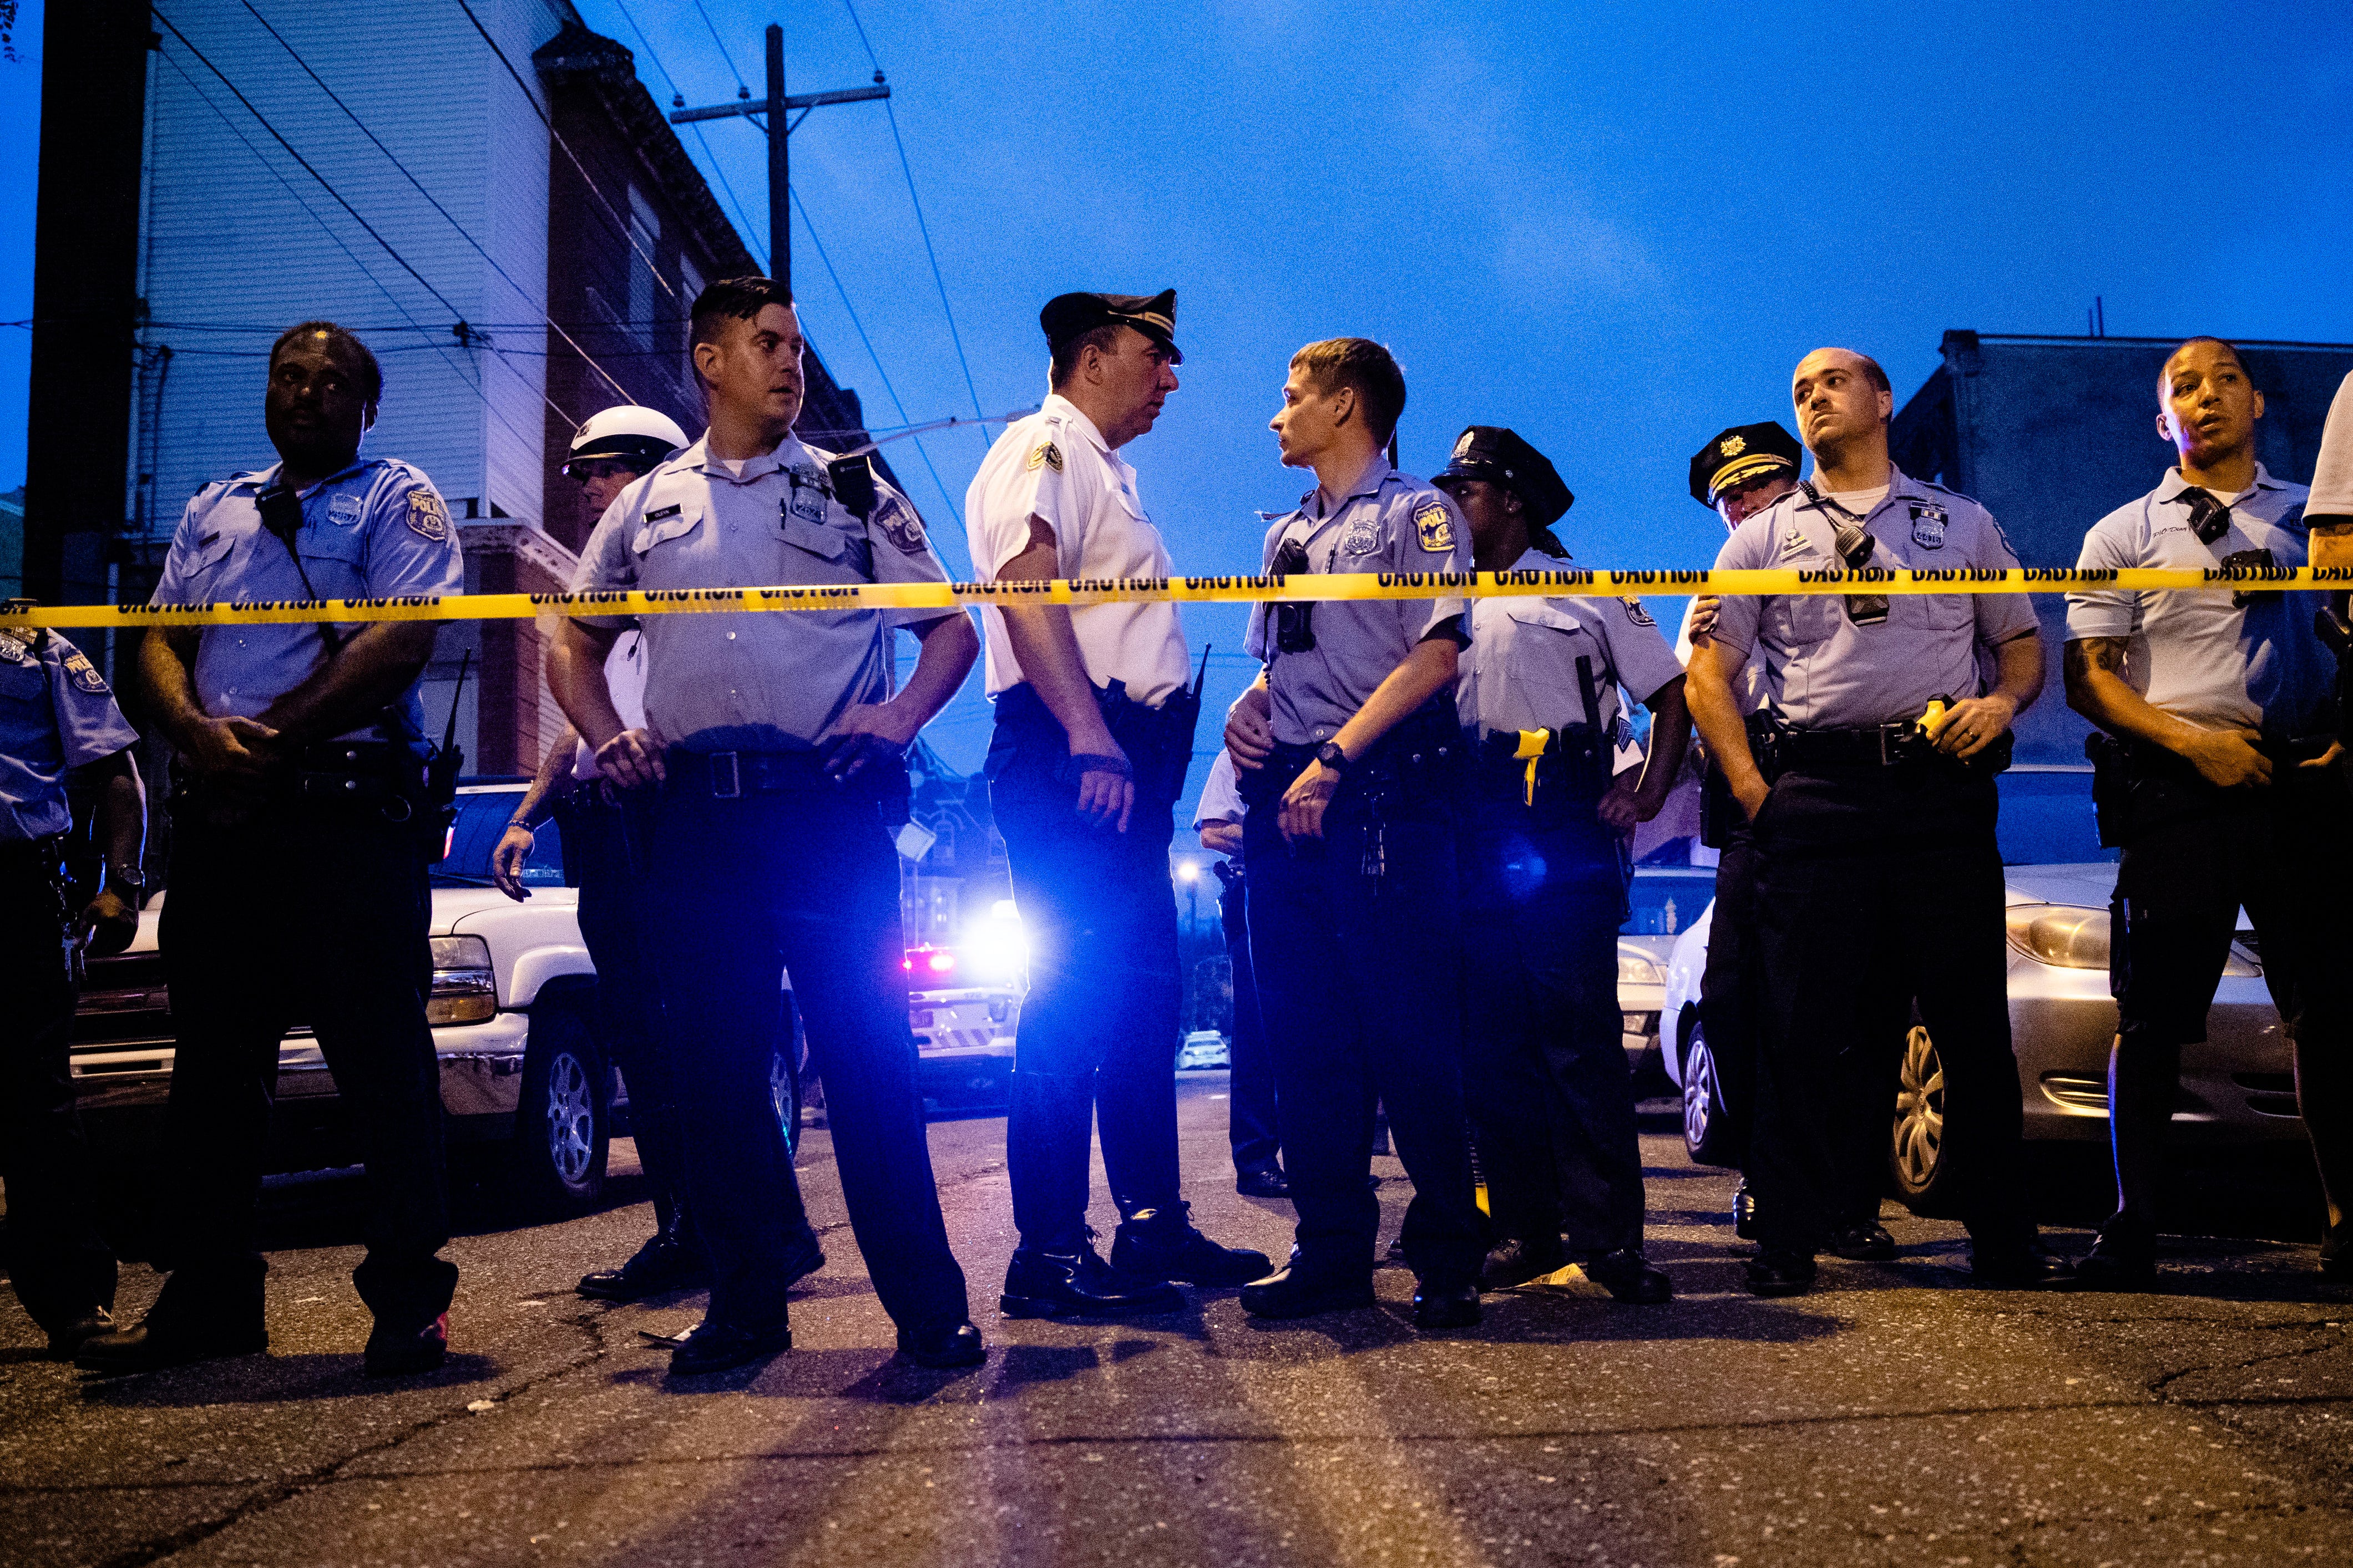 Philadelphia suspect in custody after hours-long ordeal that left 6 officers wounded